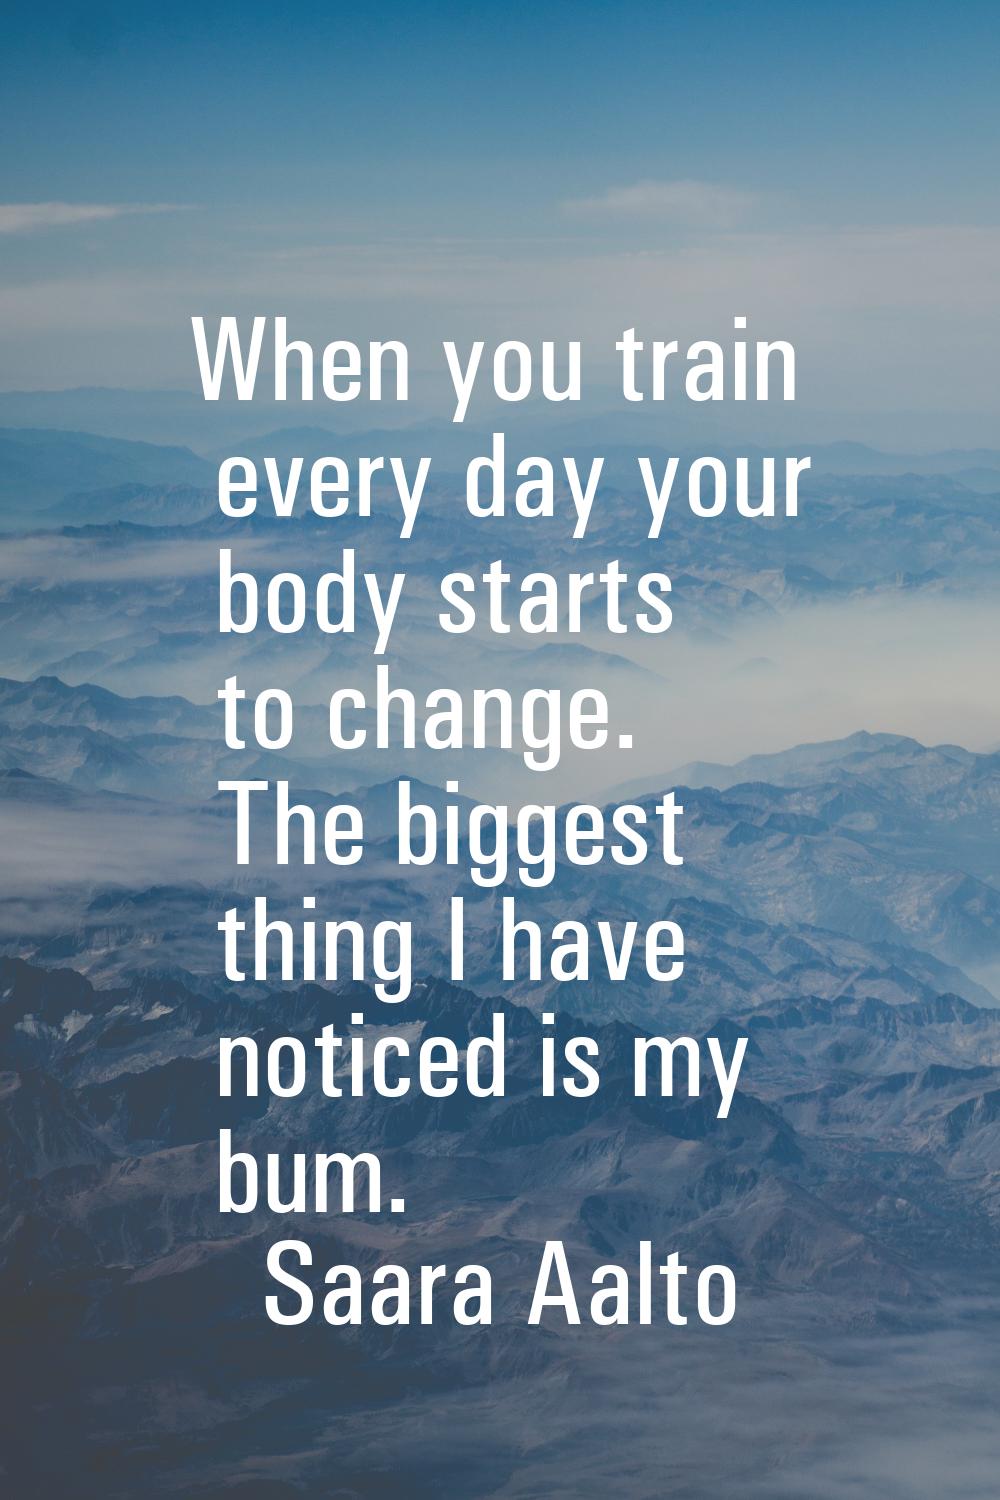 When you train every day your body starts to change. The biggest thing I have noticed is my bum.